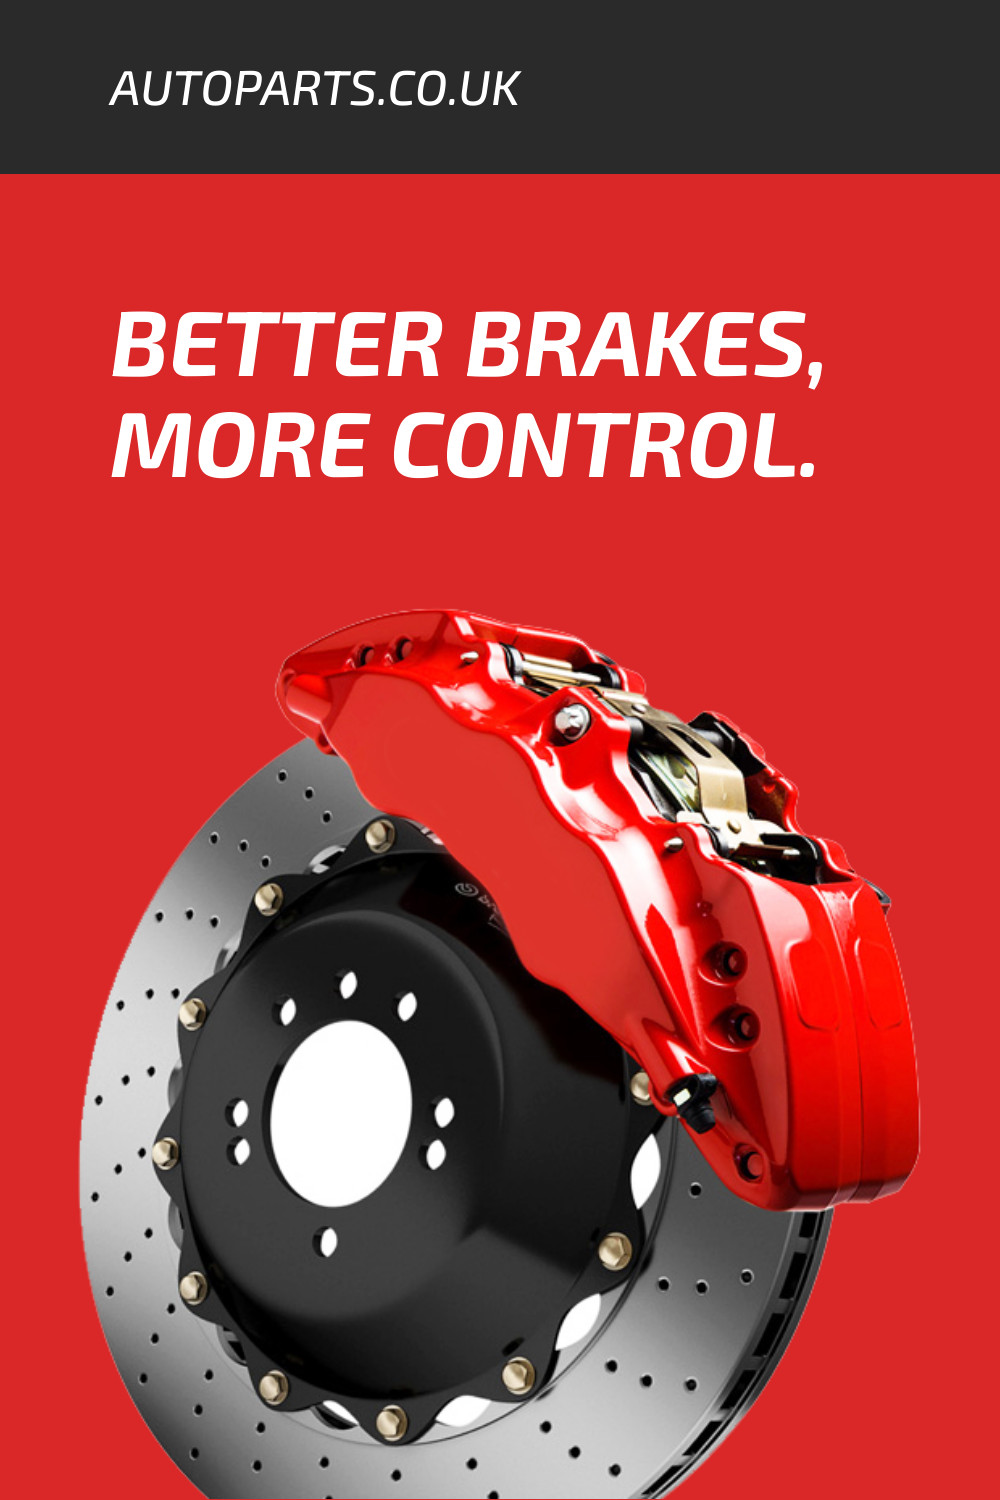 Better Brakes from Autoparts